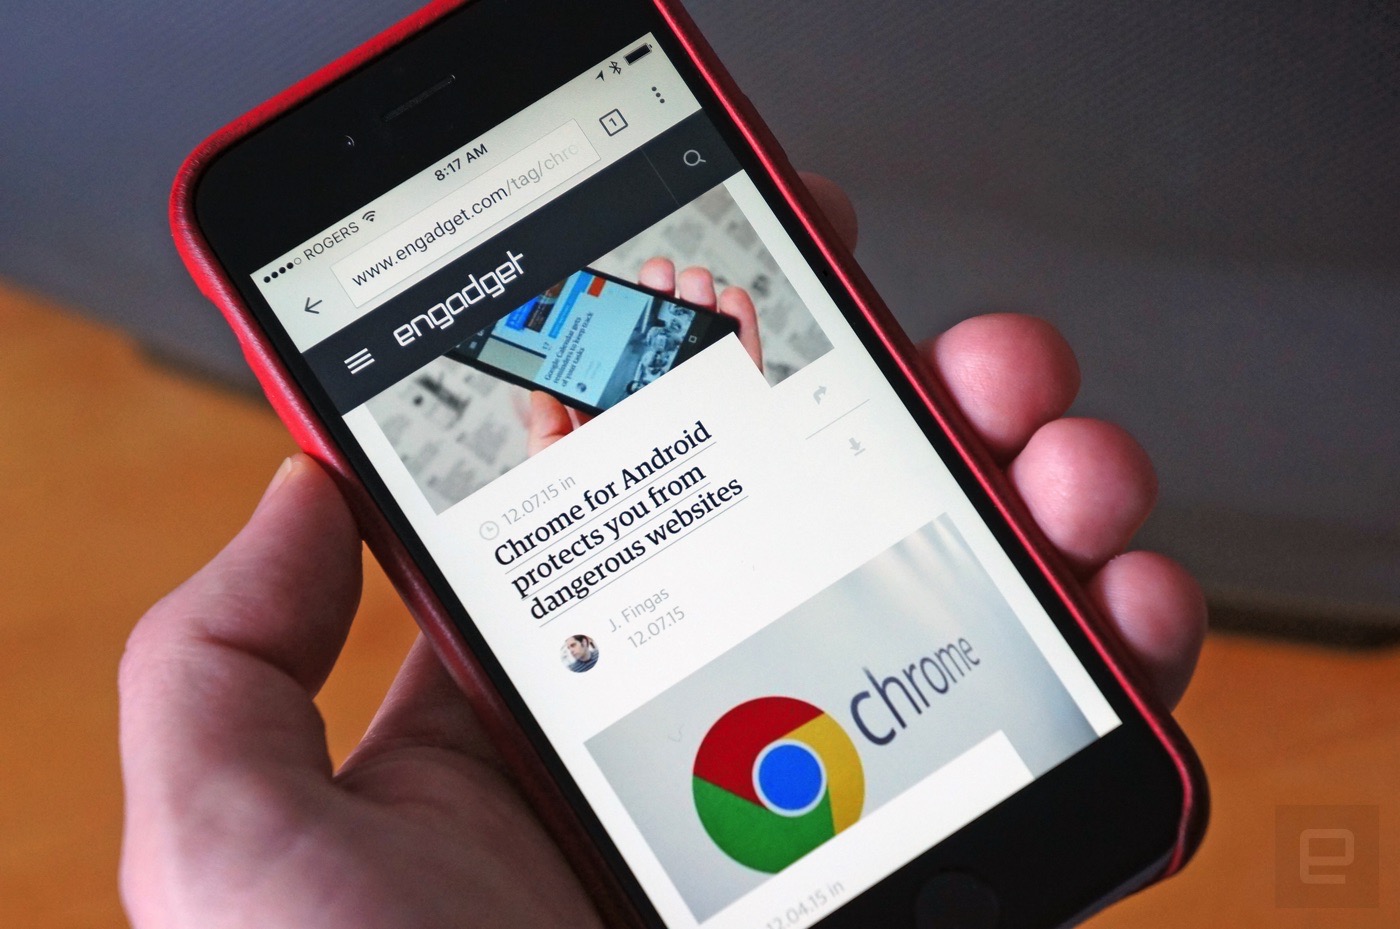 Chrome is now faster and more reliable on iOS